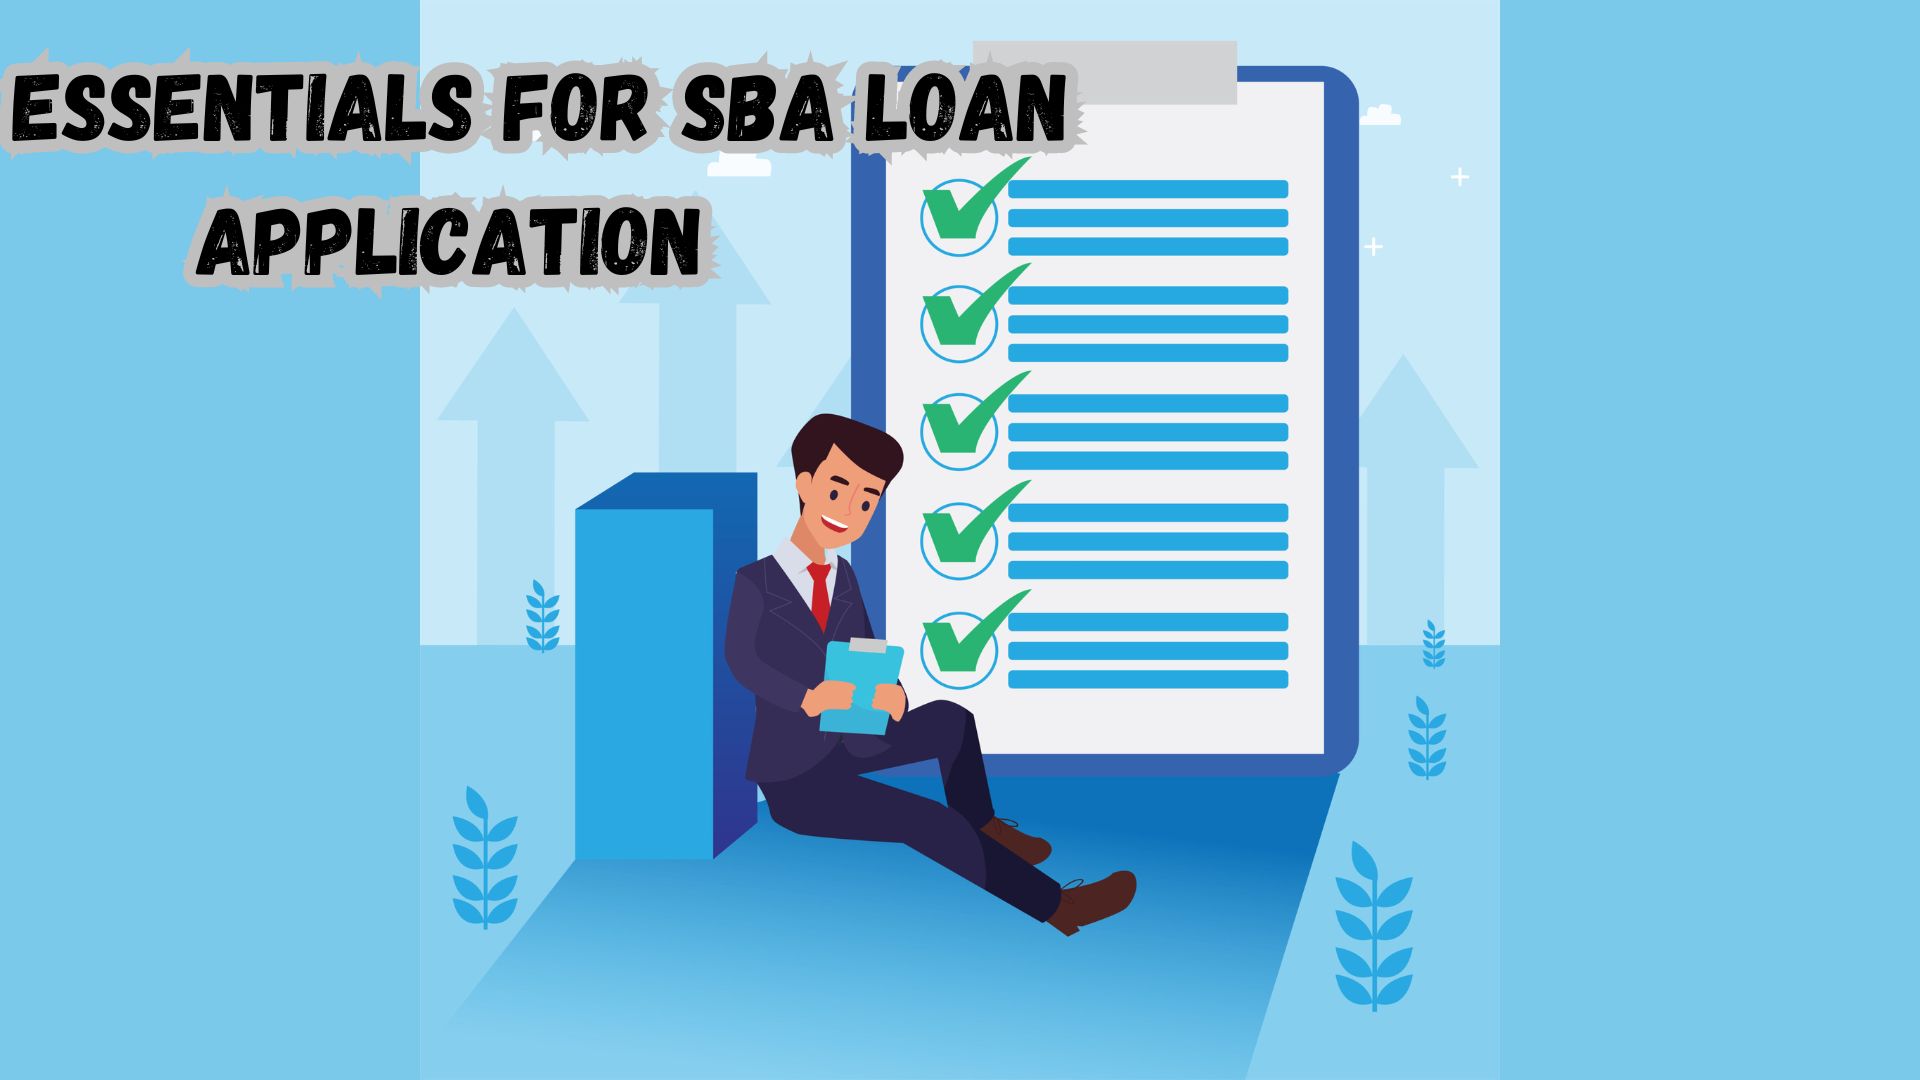 The Essentials for SBA Loan Application.